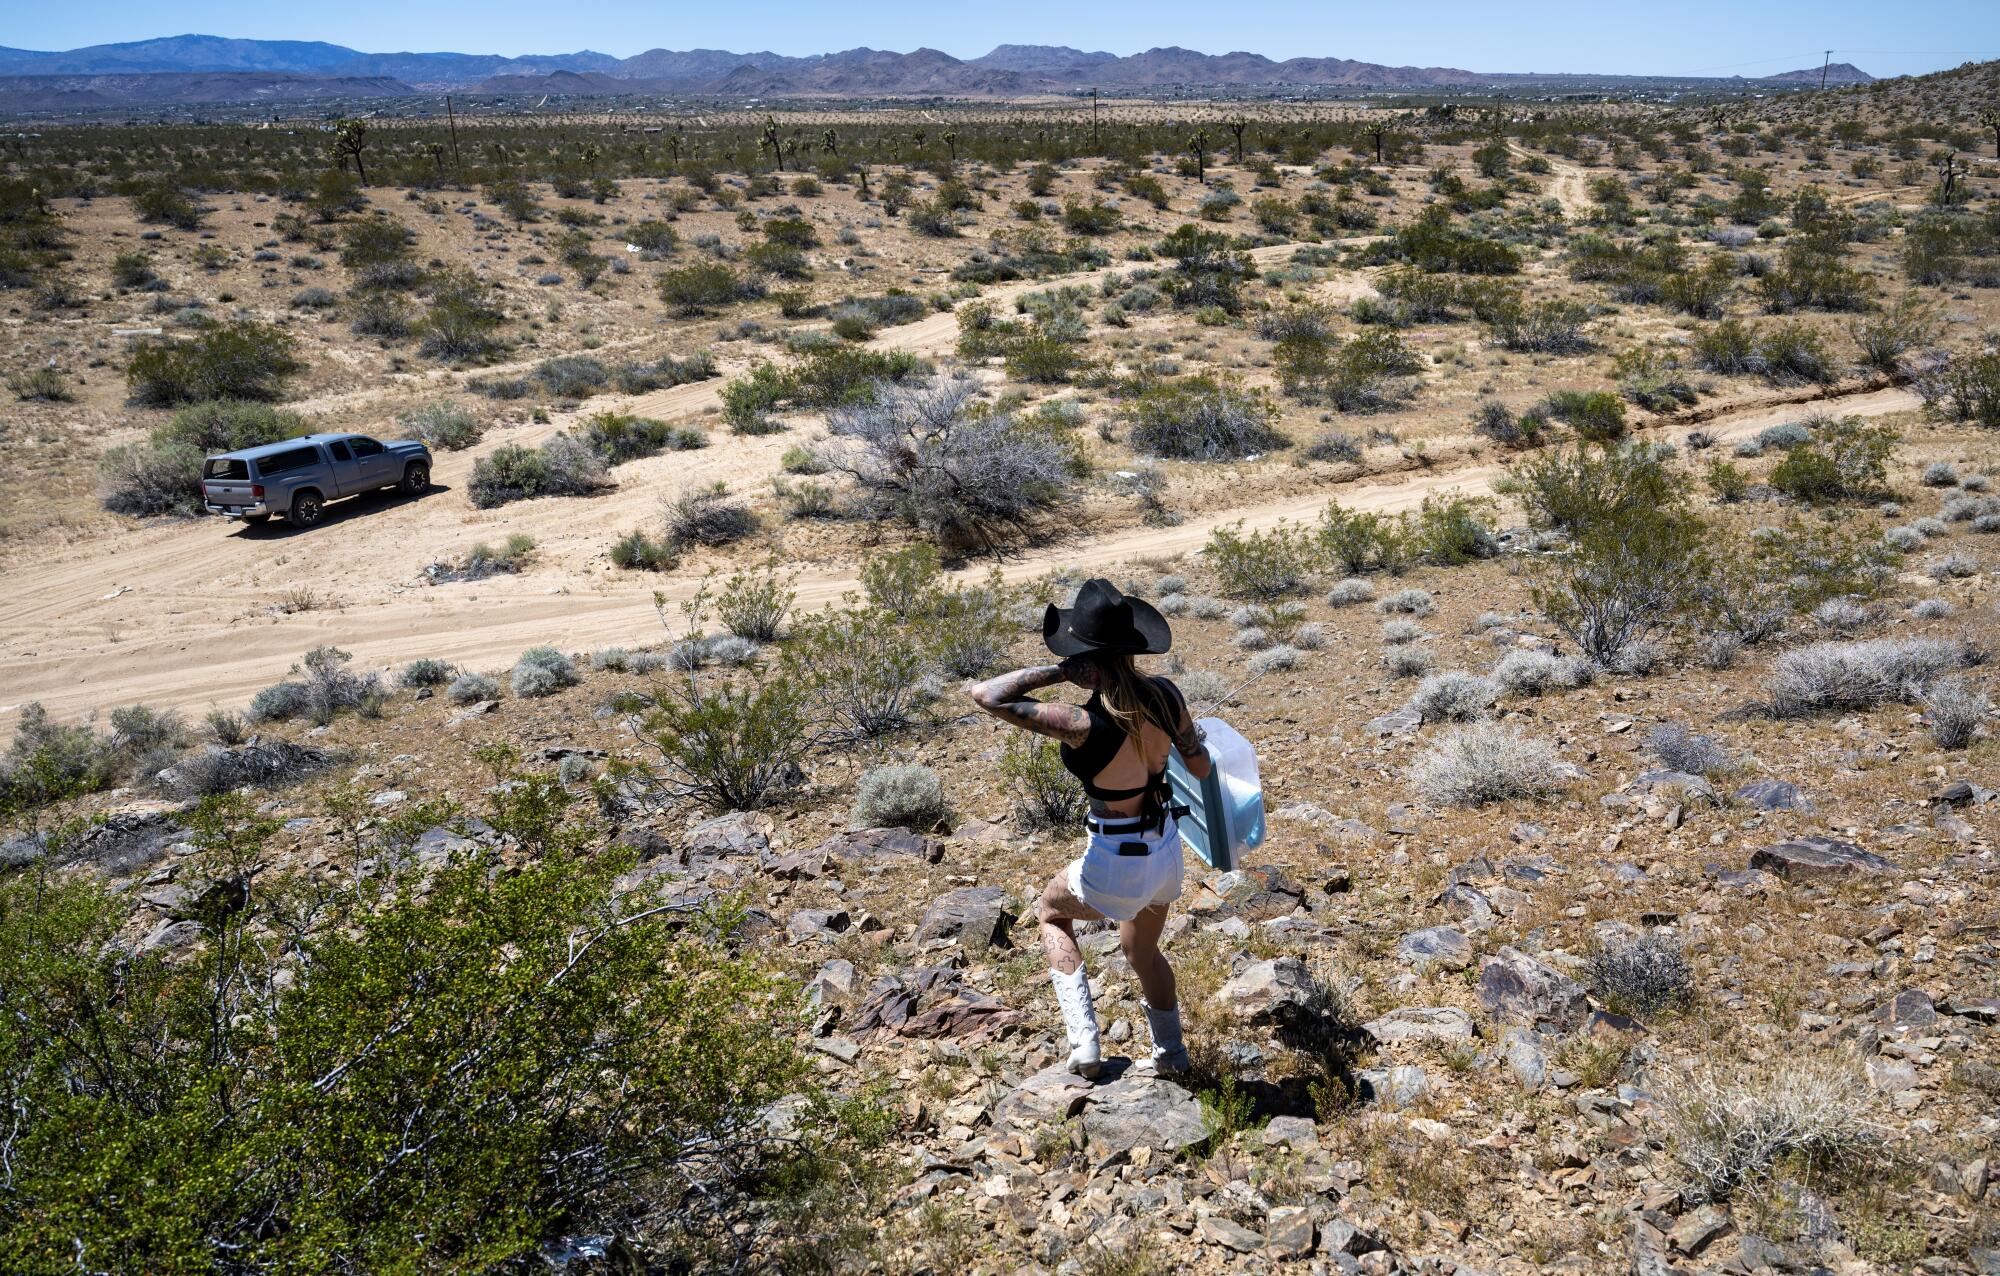 Wall trudges down a hill toward her truck in the high desert after relocating a snake. Jagged hills rise in the distance.